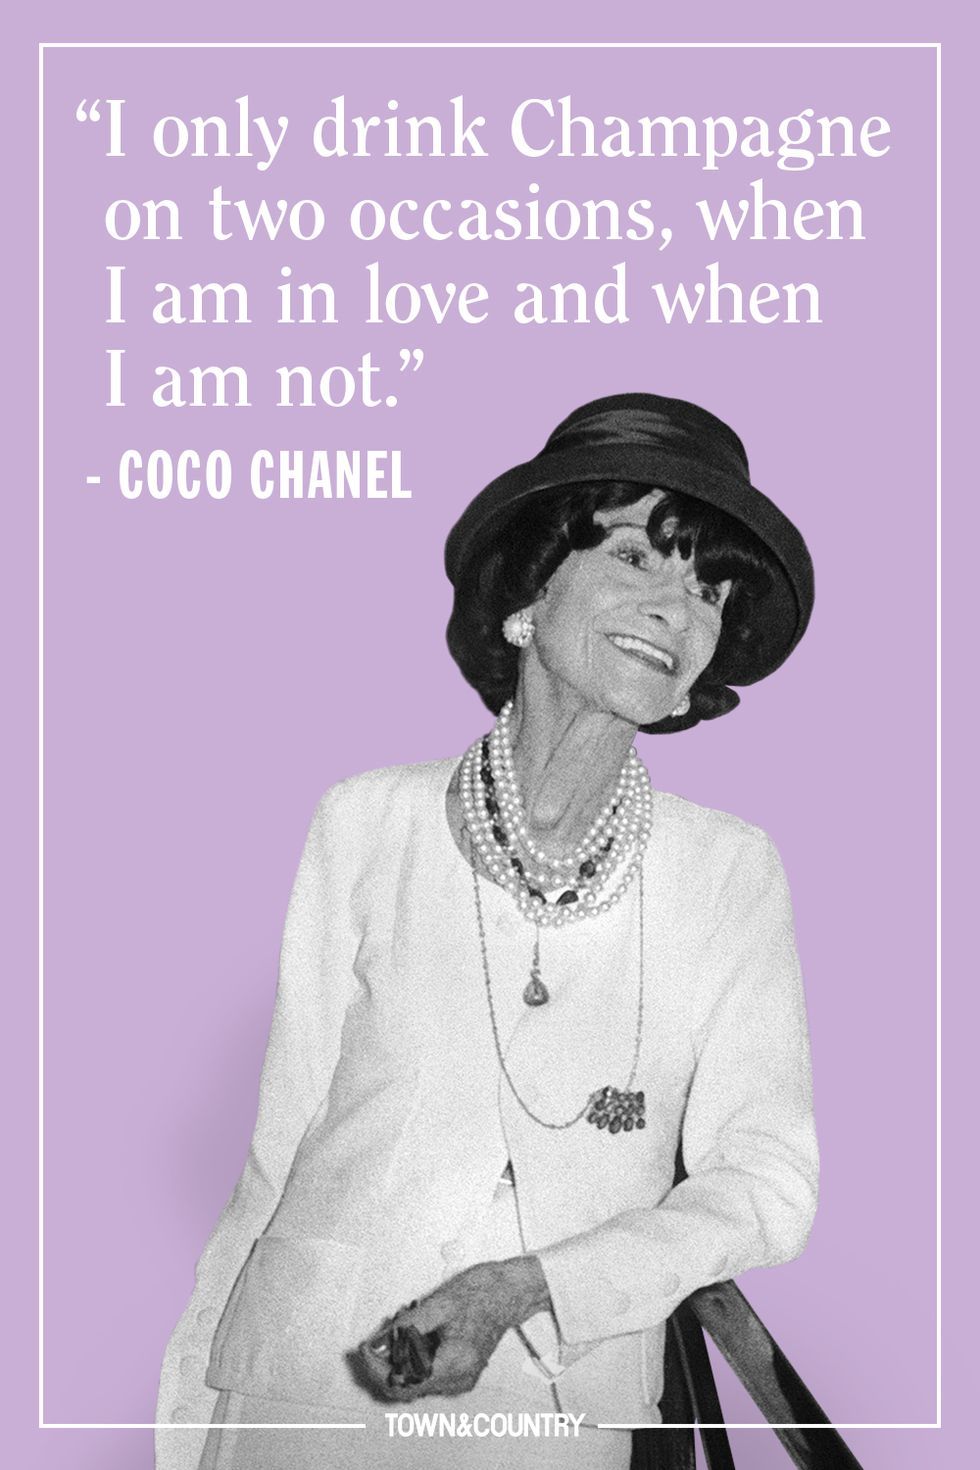 Top 10 Coco Chanel Quotes to Make You Irresistibly Bold  Coco chanel quotes  Chanel quotes Inspirational quotes pictures